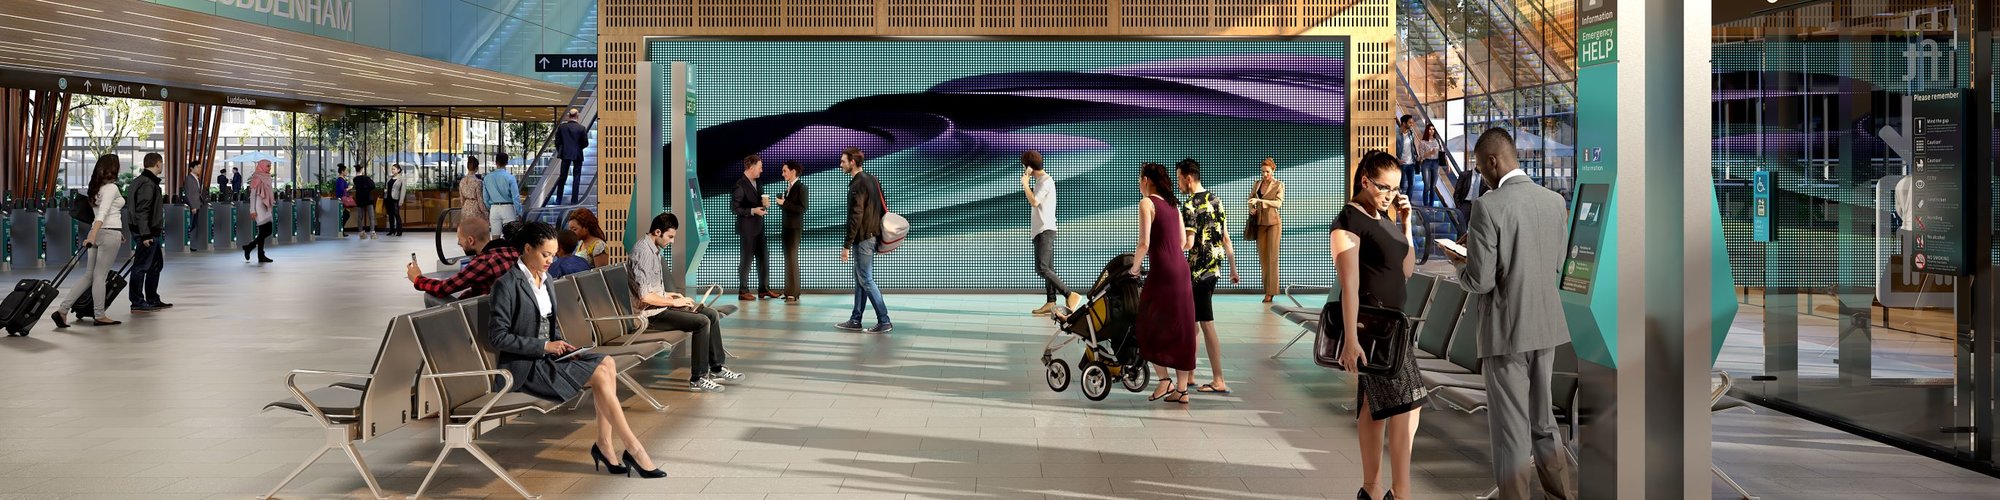 An artist's impression of the inside concourse of Sydney Metro Luddenham Station.